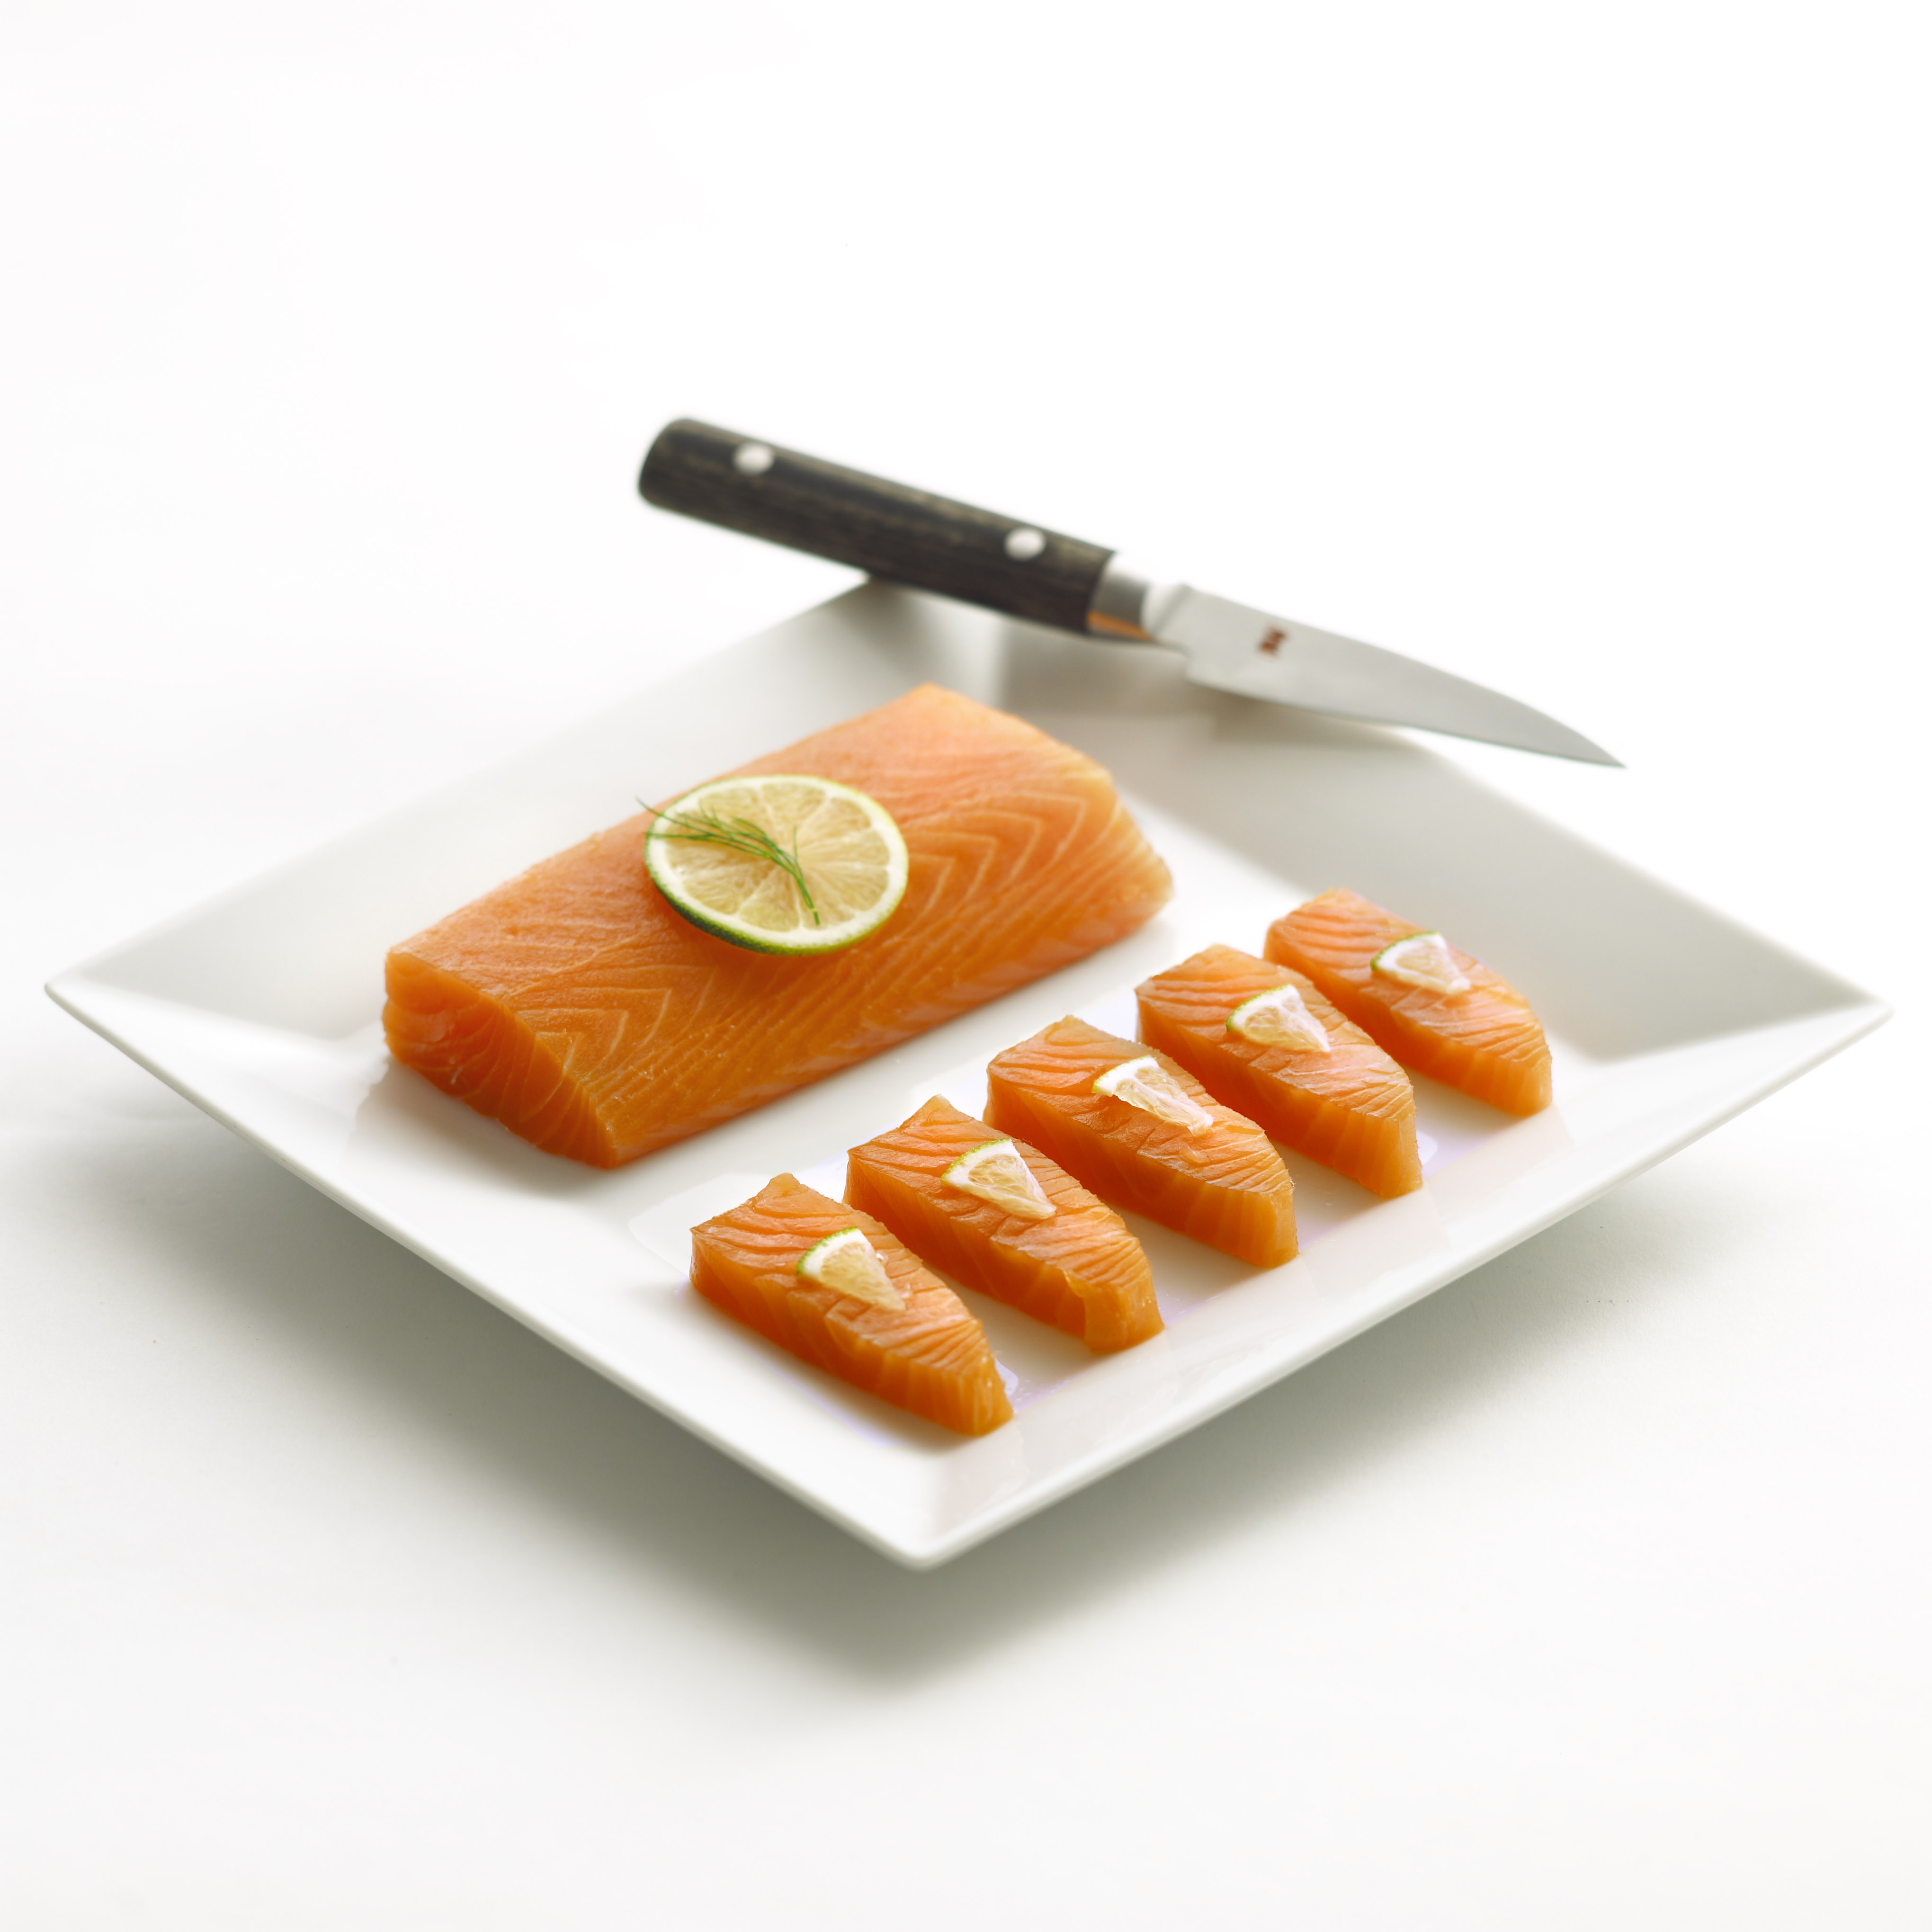 The Balmoral Fillet the jewel of the smoked salmon crown